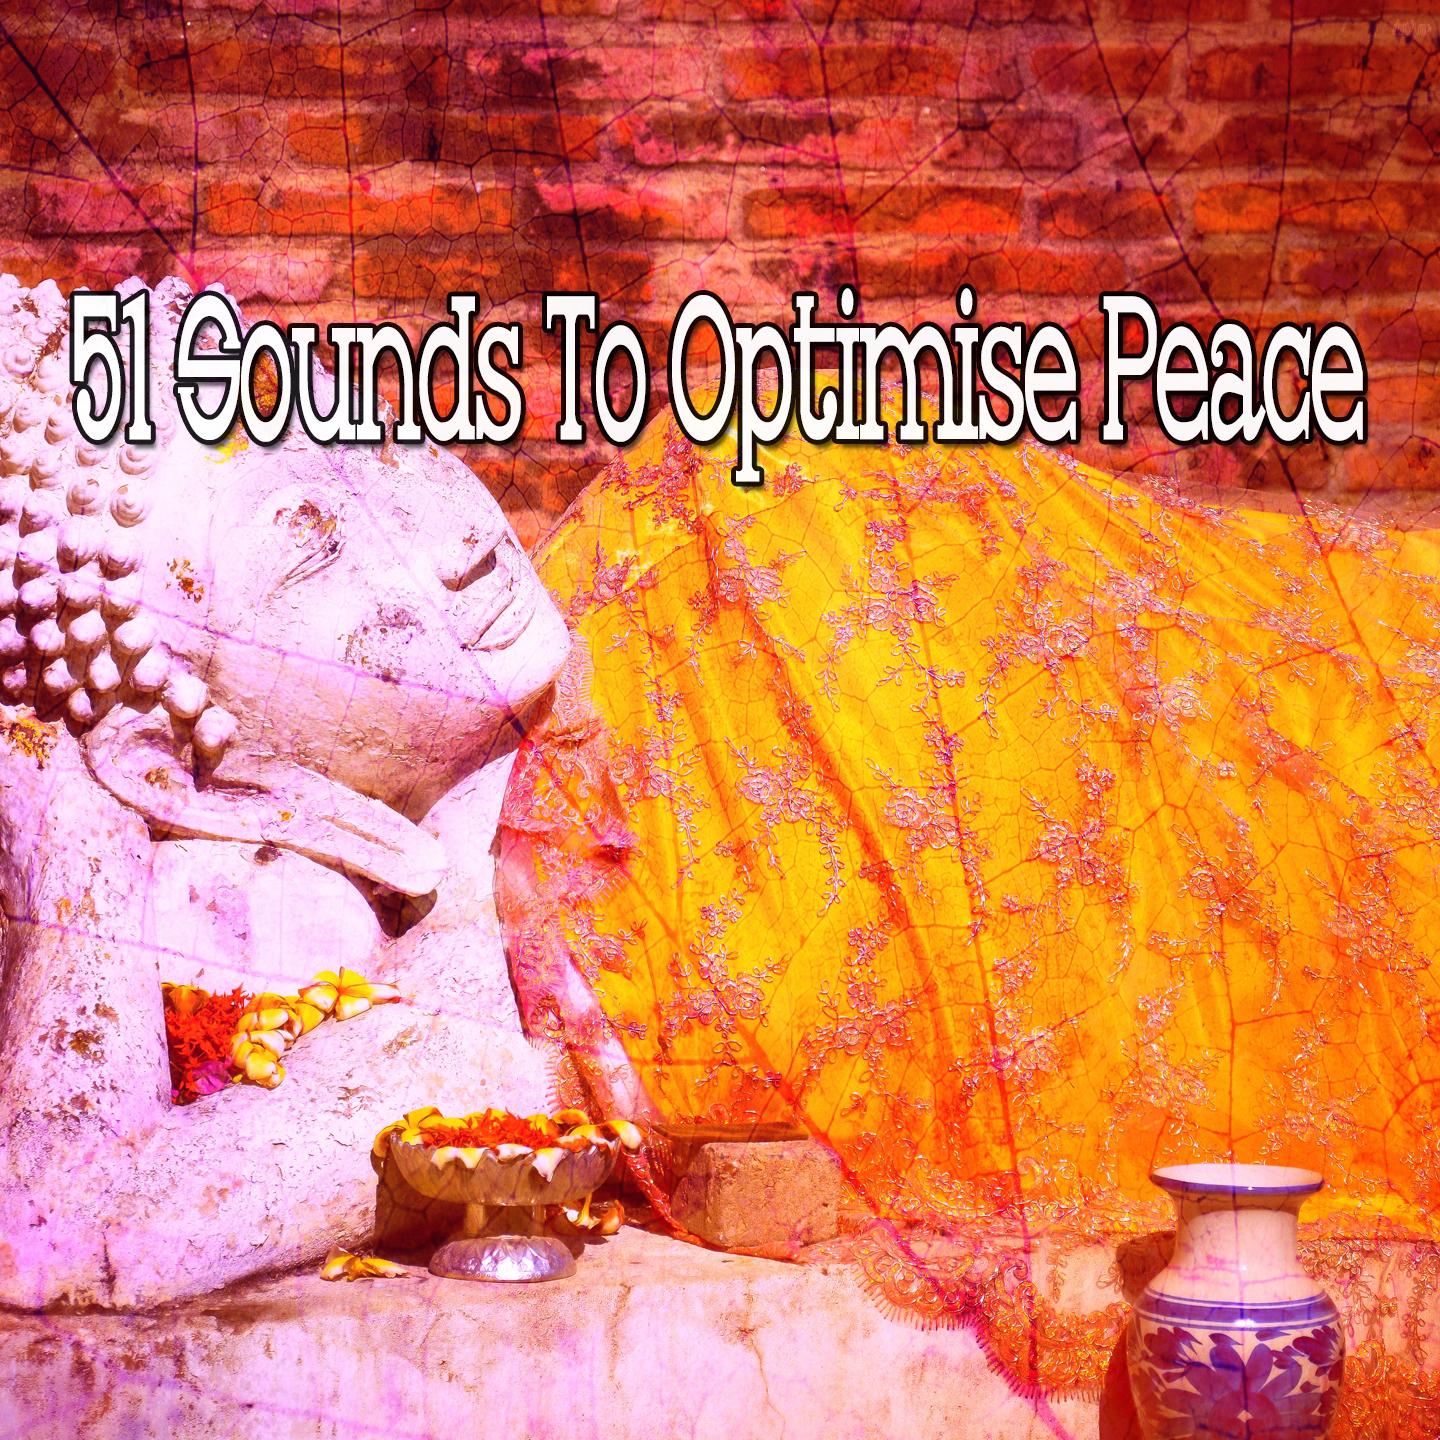 51 Sounds to Optimise Peace